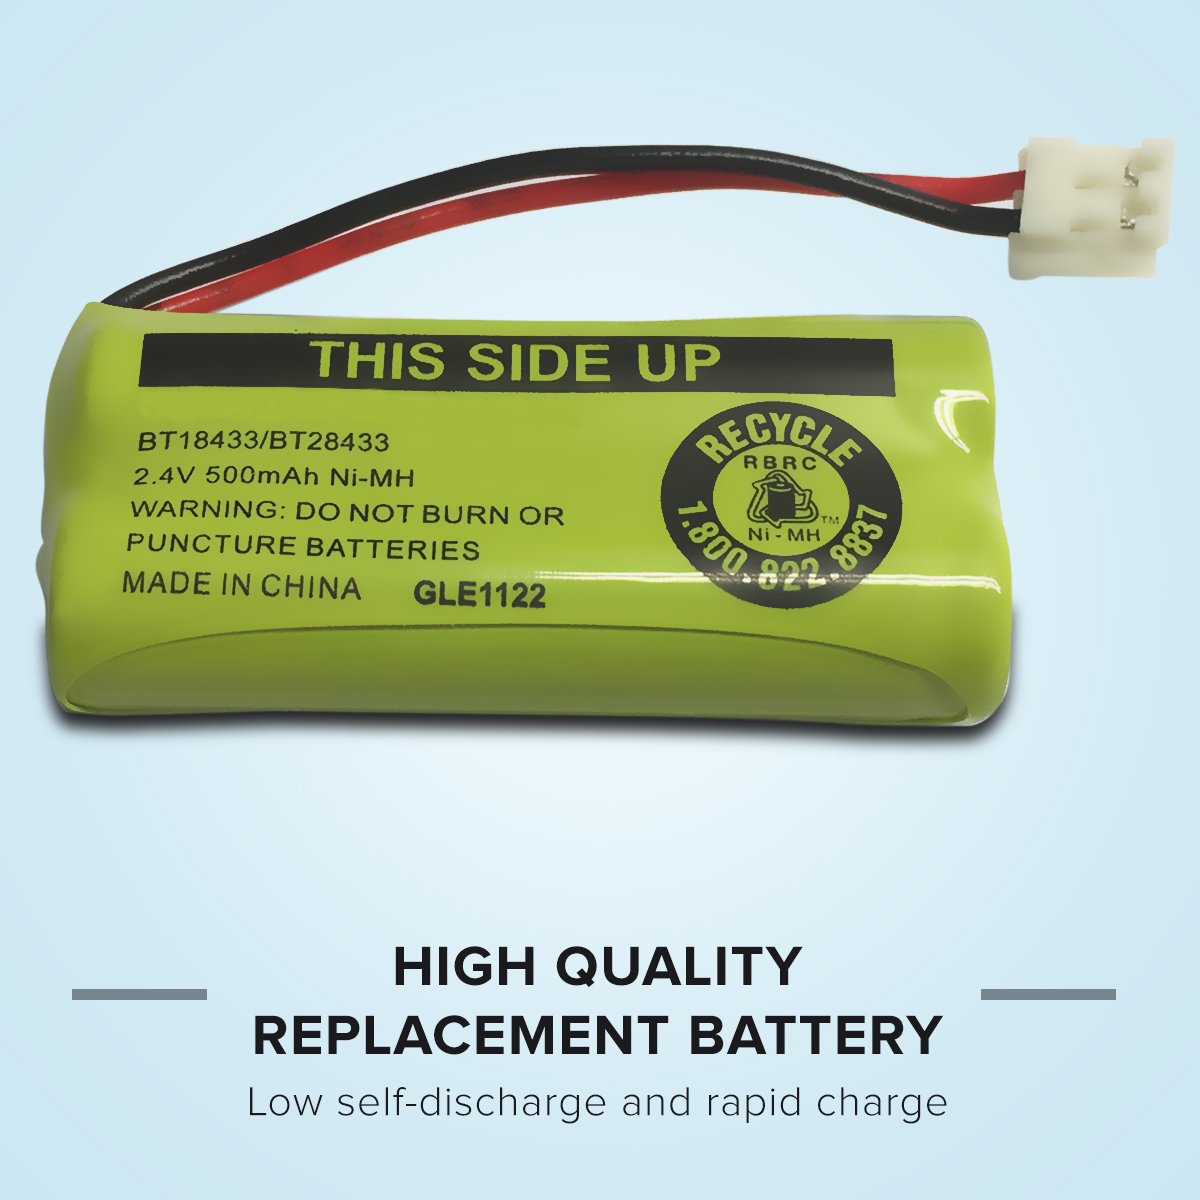 AT&T  CL82609 Cordless Phone Battery